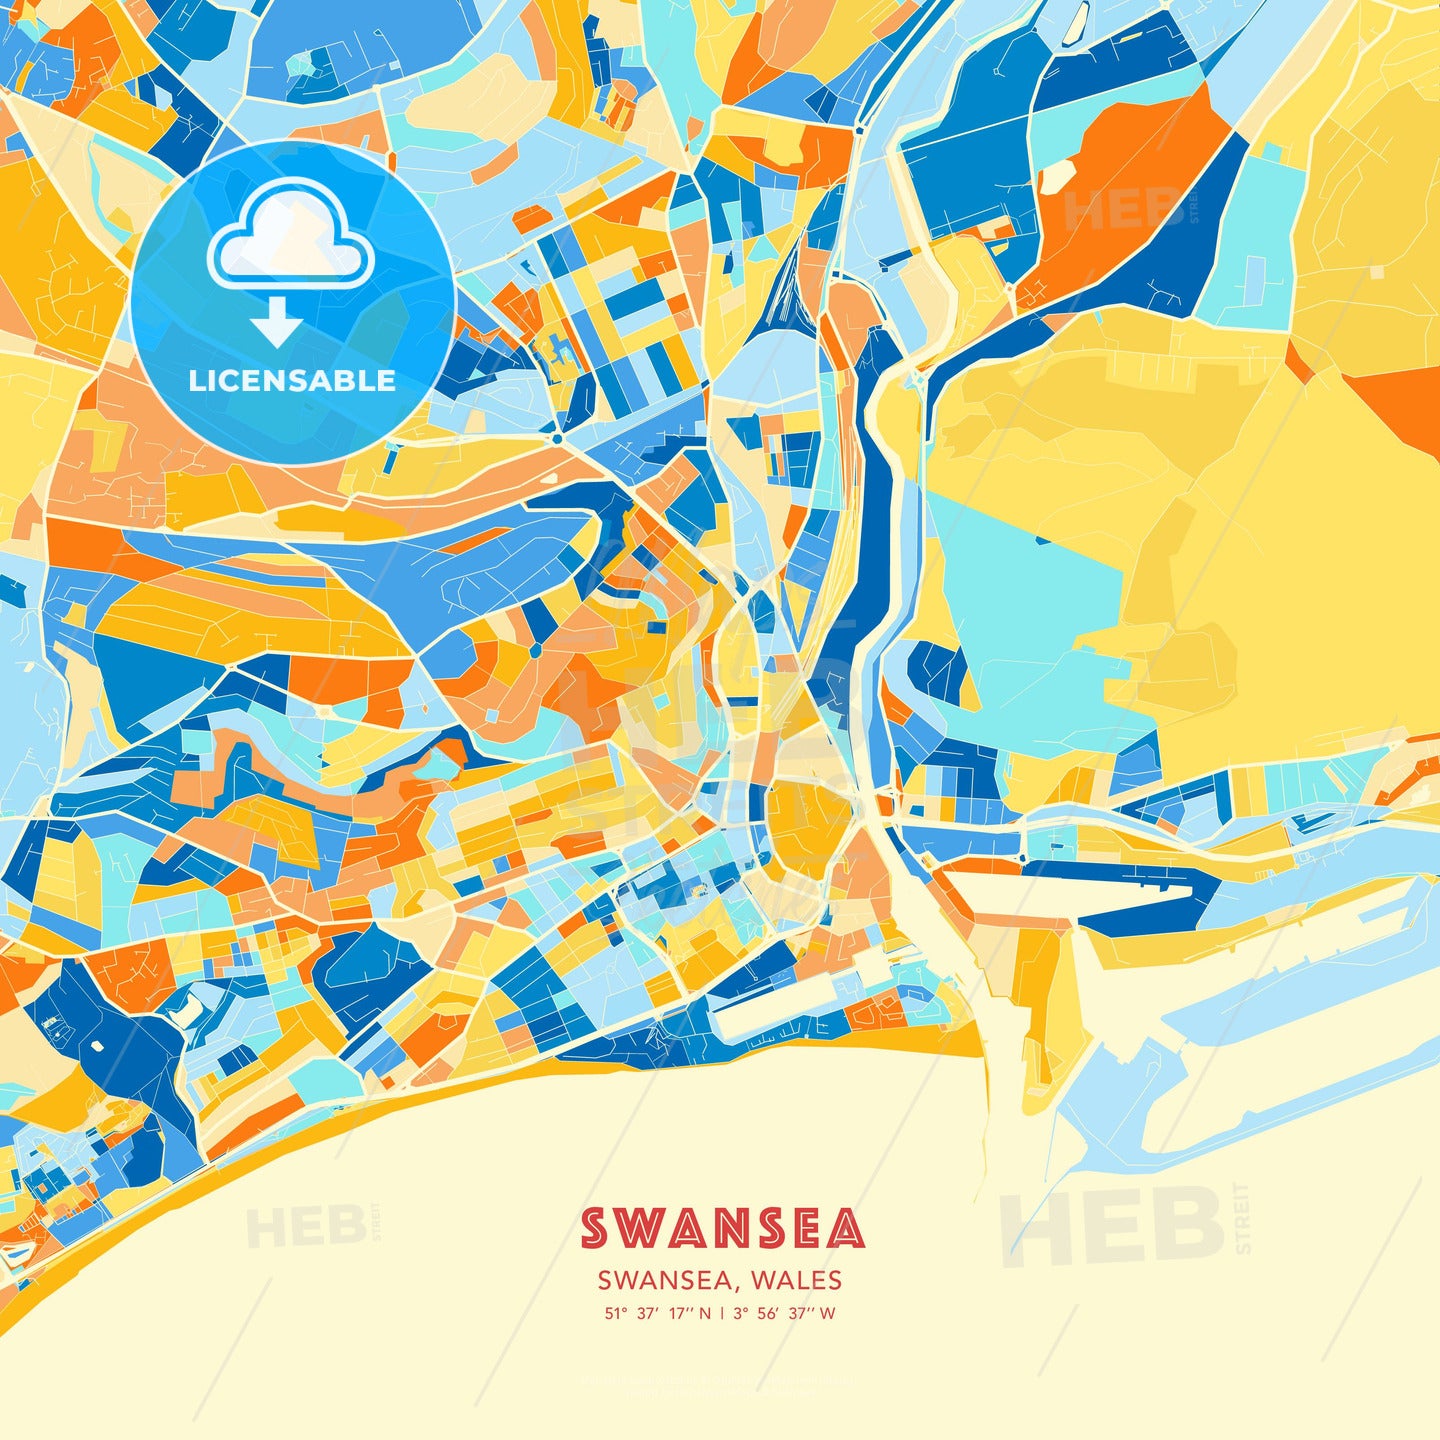 Swansea, Swansea, Wales, map - HEBSTREITS Sketches